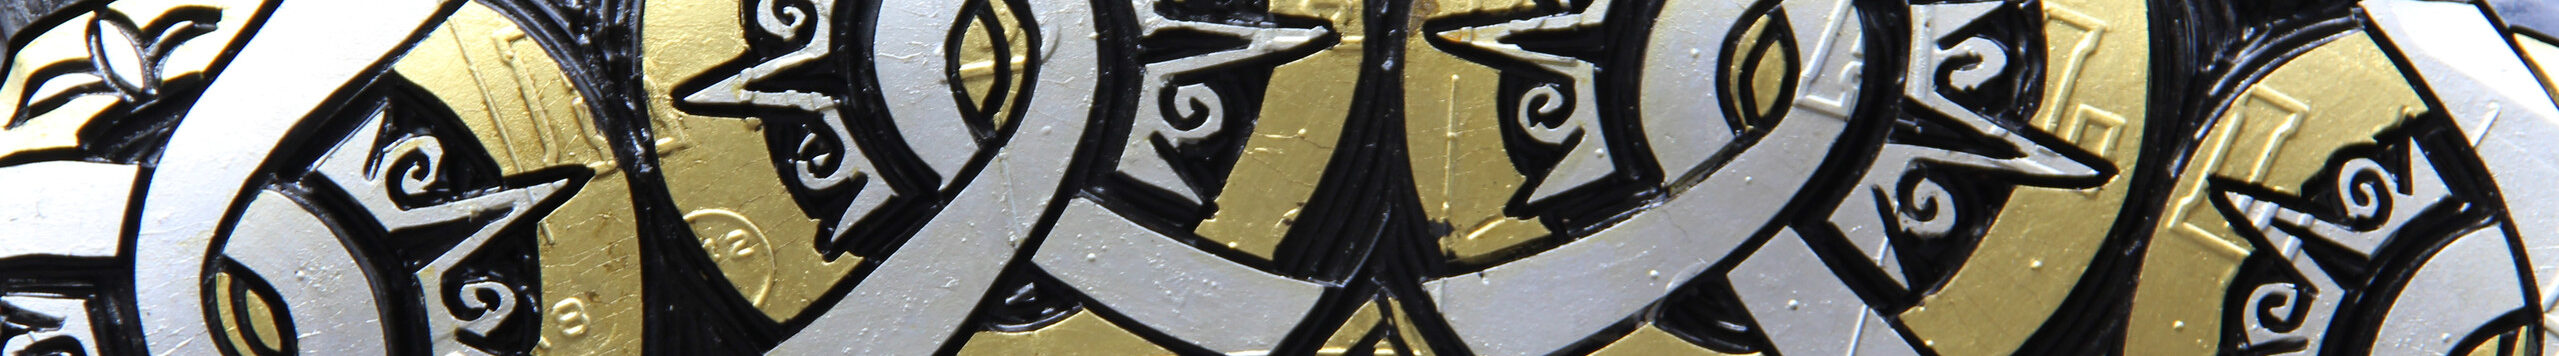 Close-up photograph of a sculpture made of a truck tire carved with circular designs and painted gold and silver